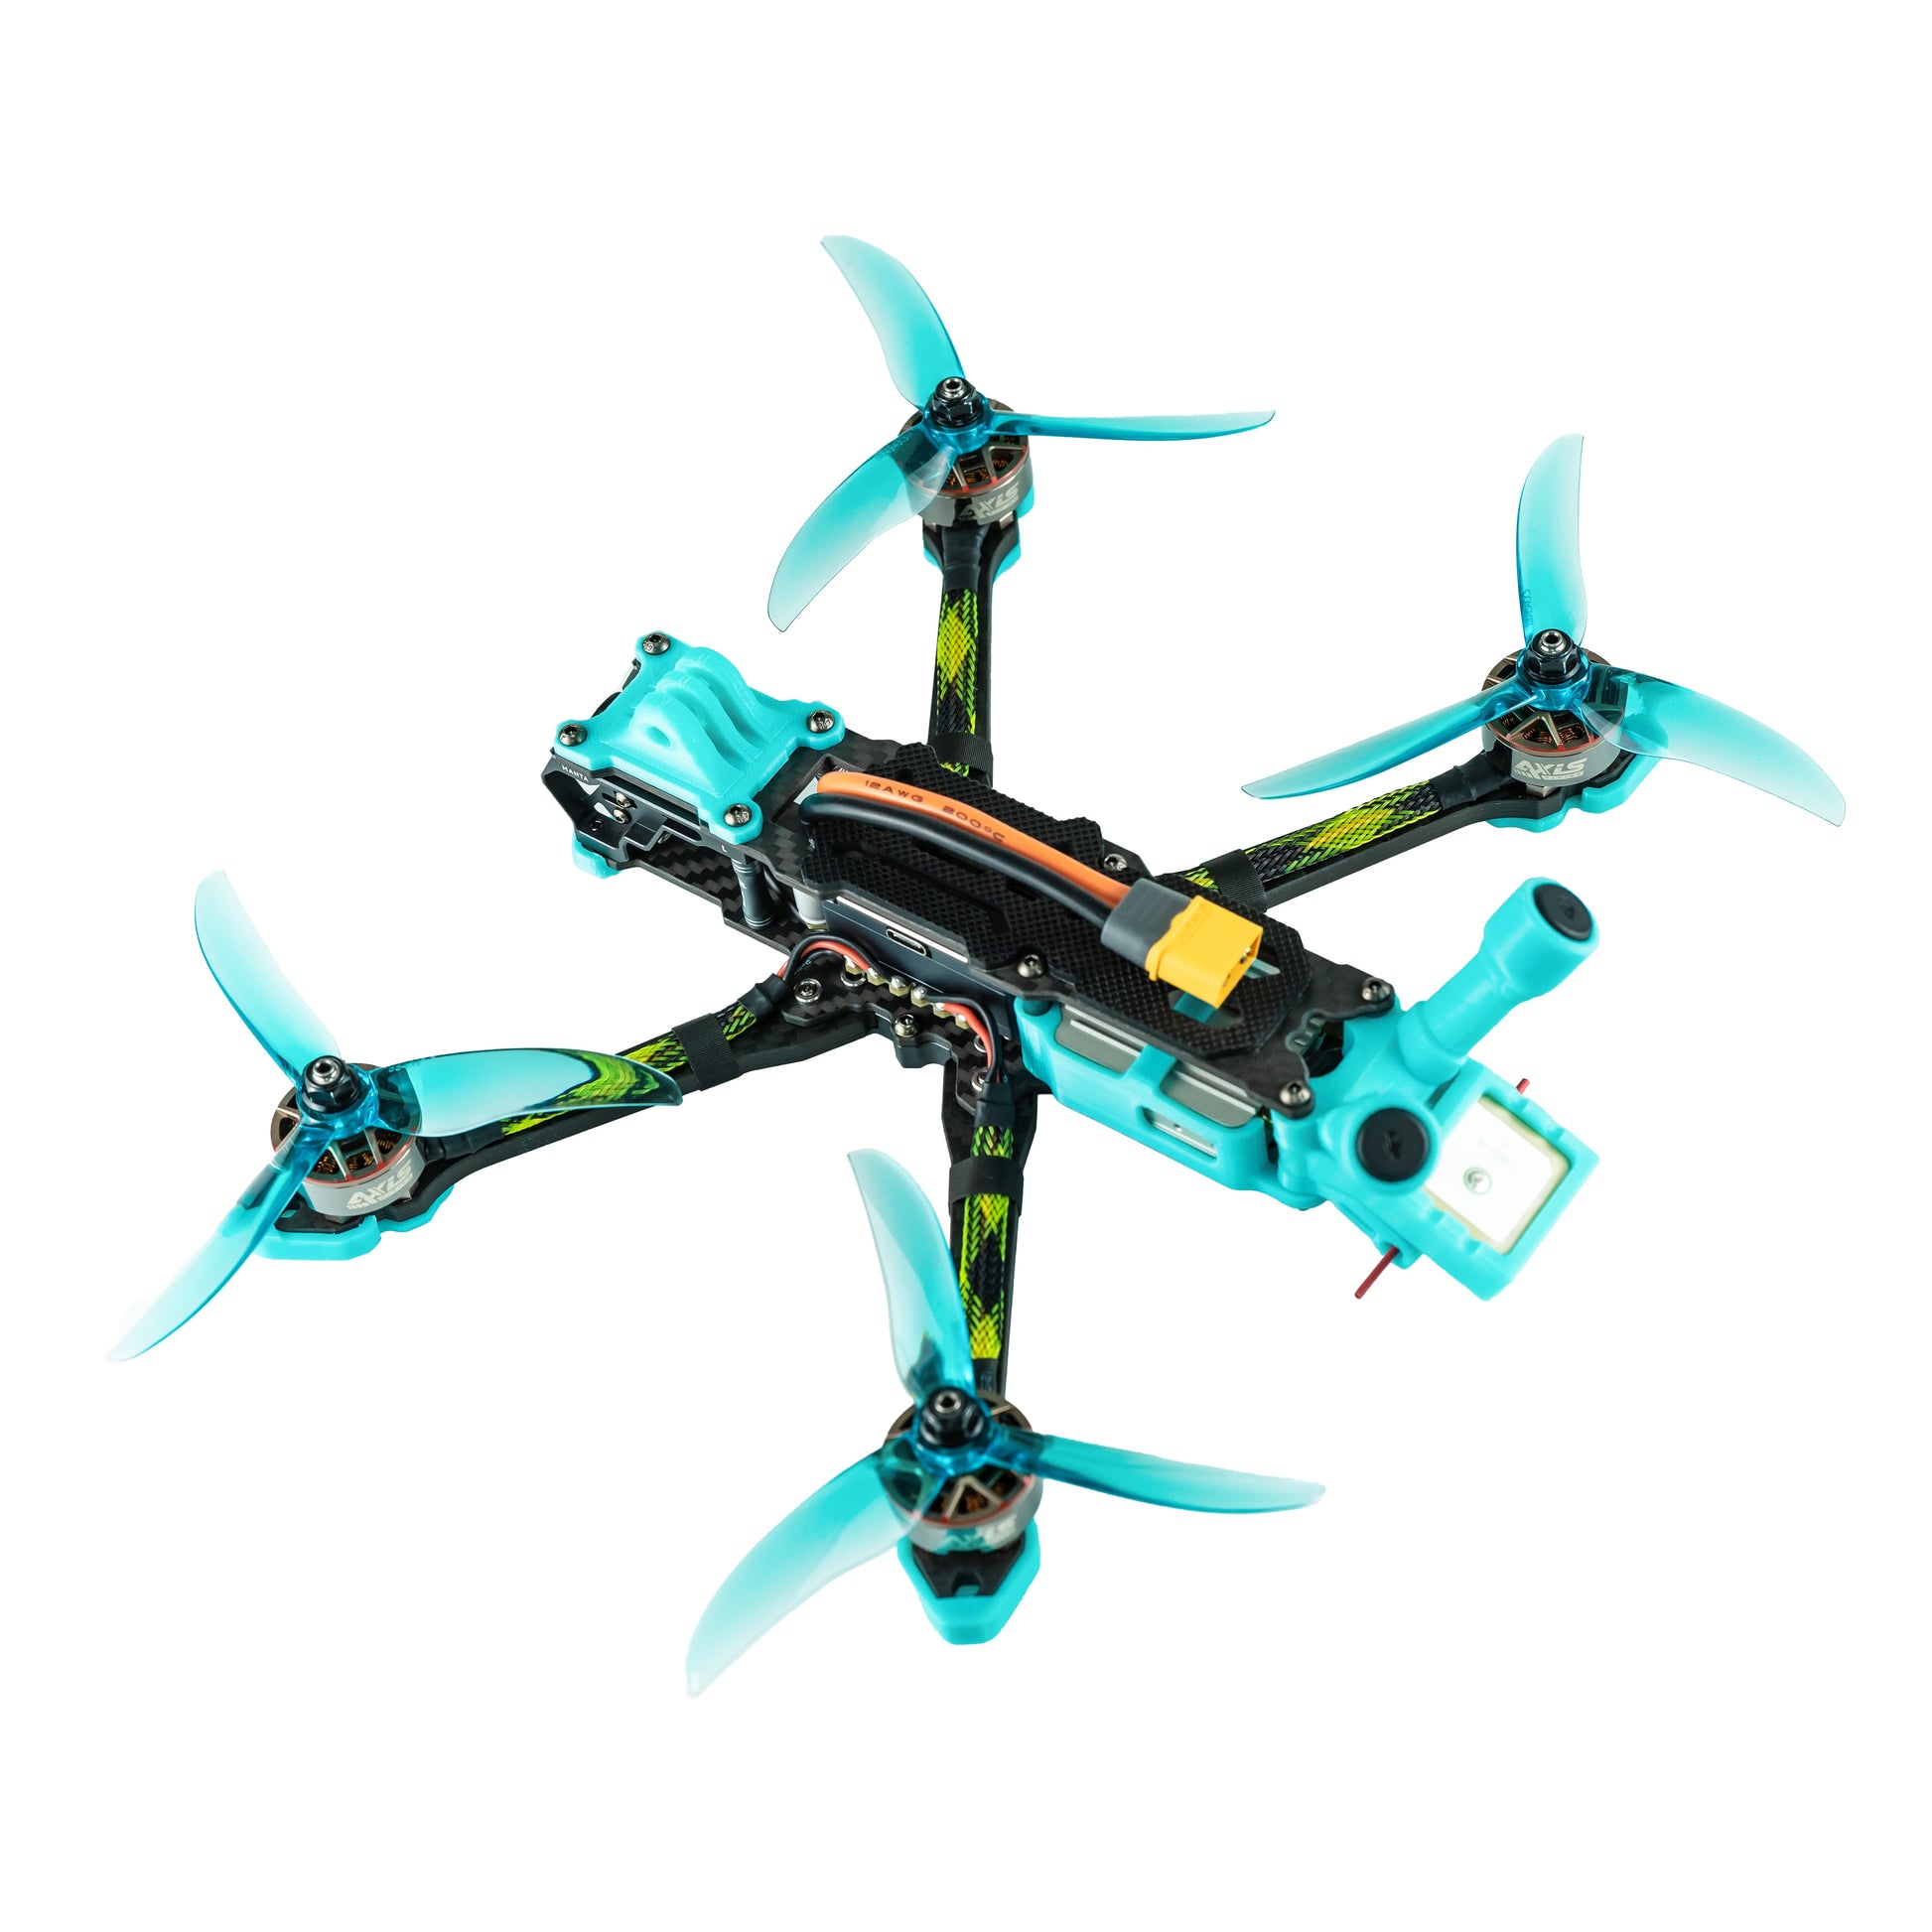 Axisflying MANTA5" -  5inch FPV Freestyle Squashed X Drone with GPS